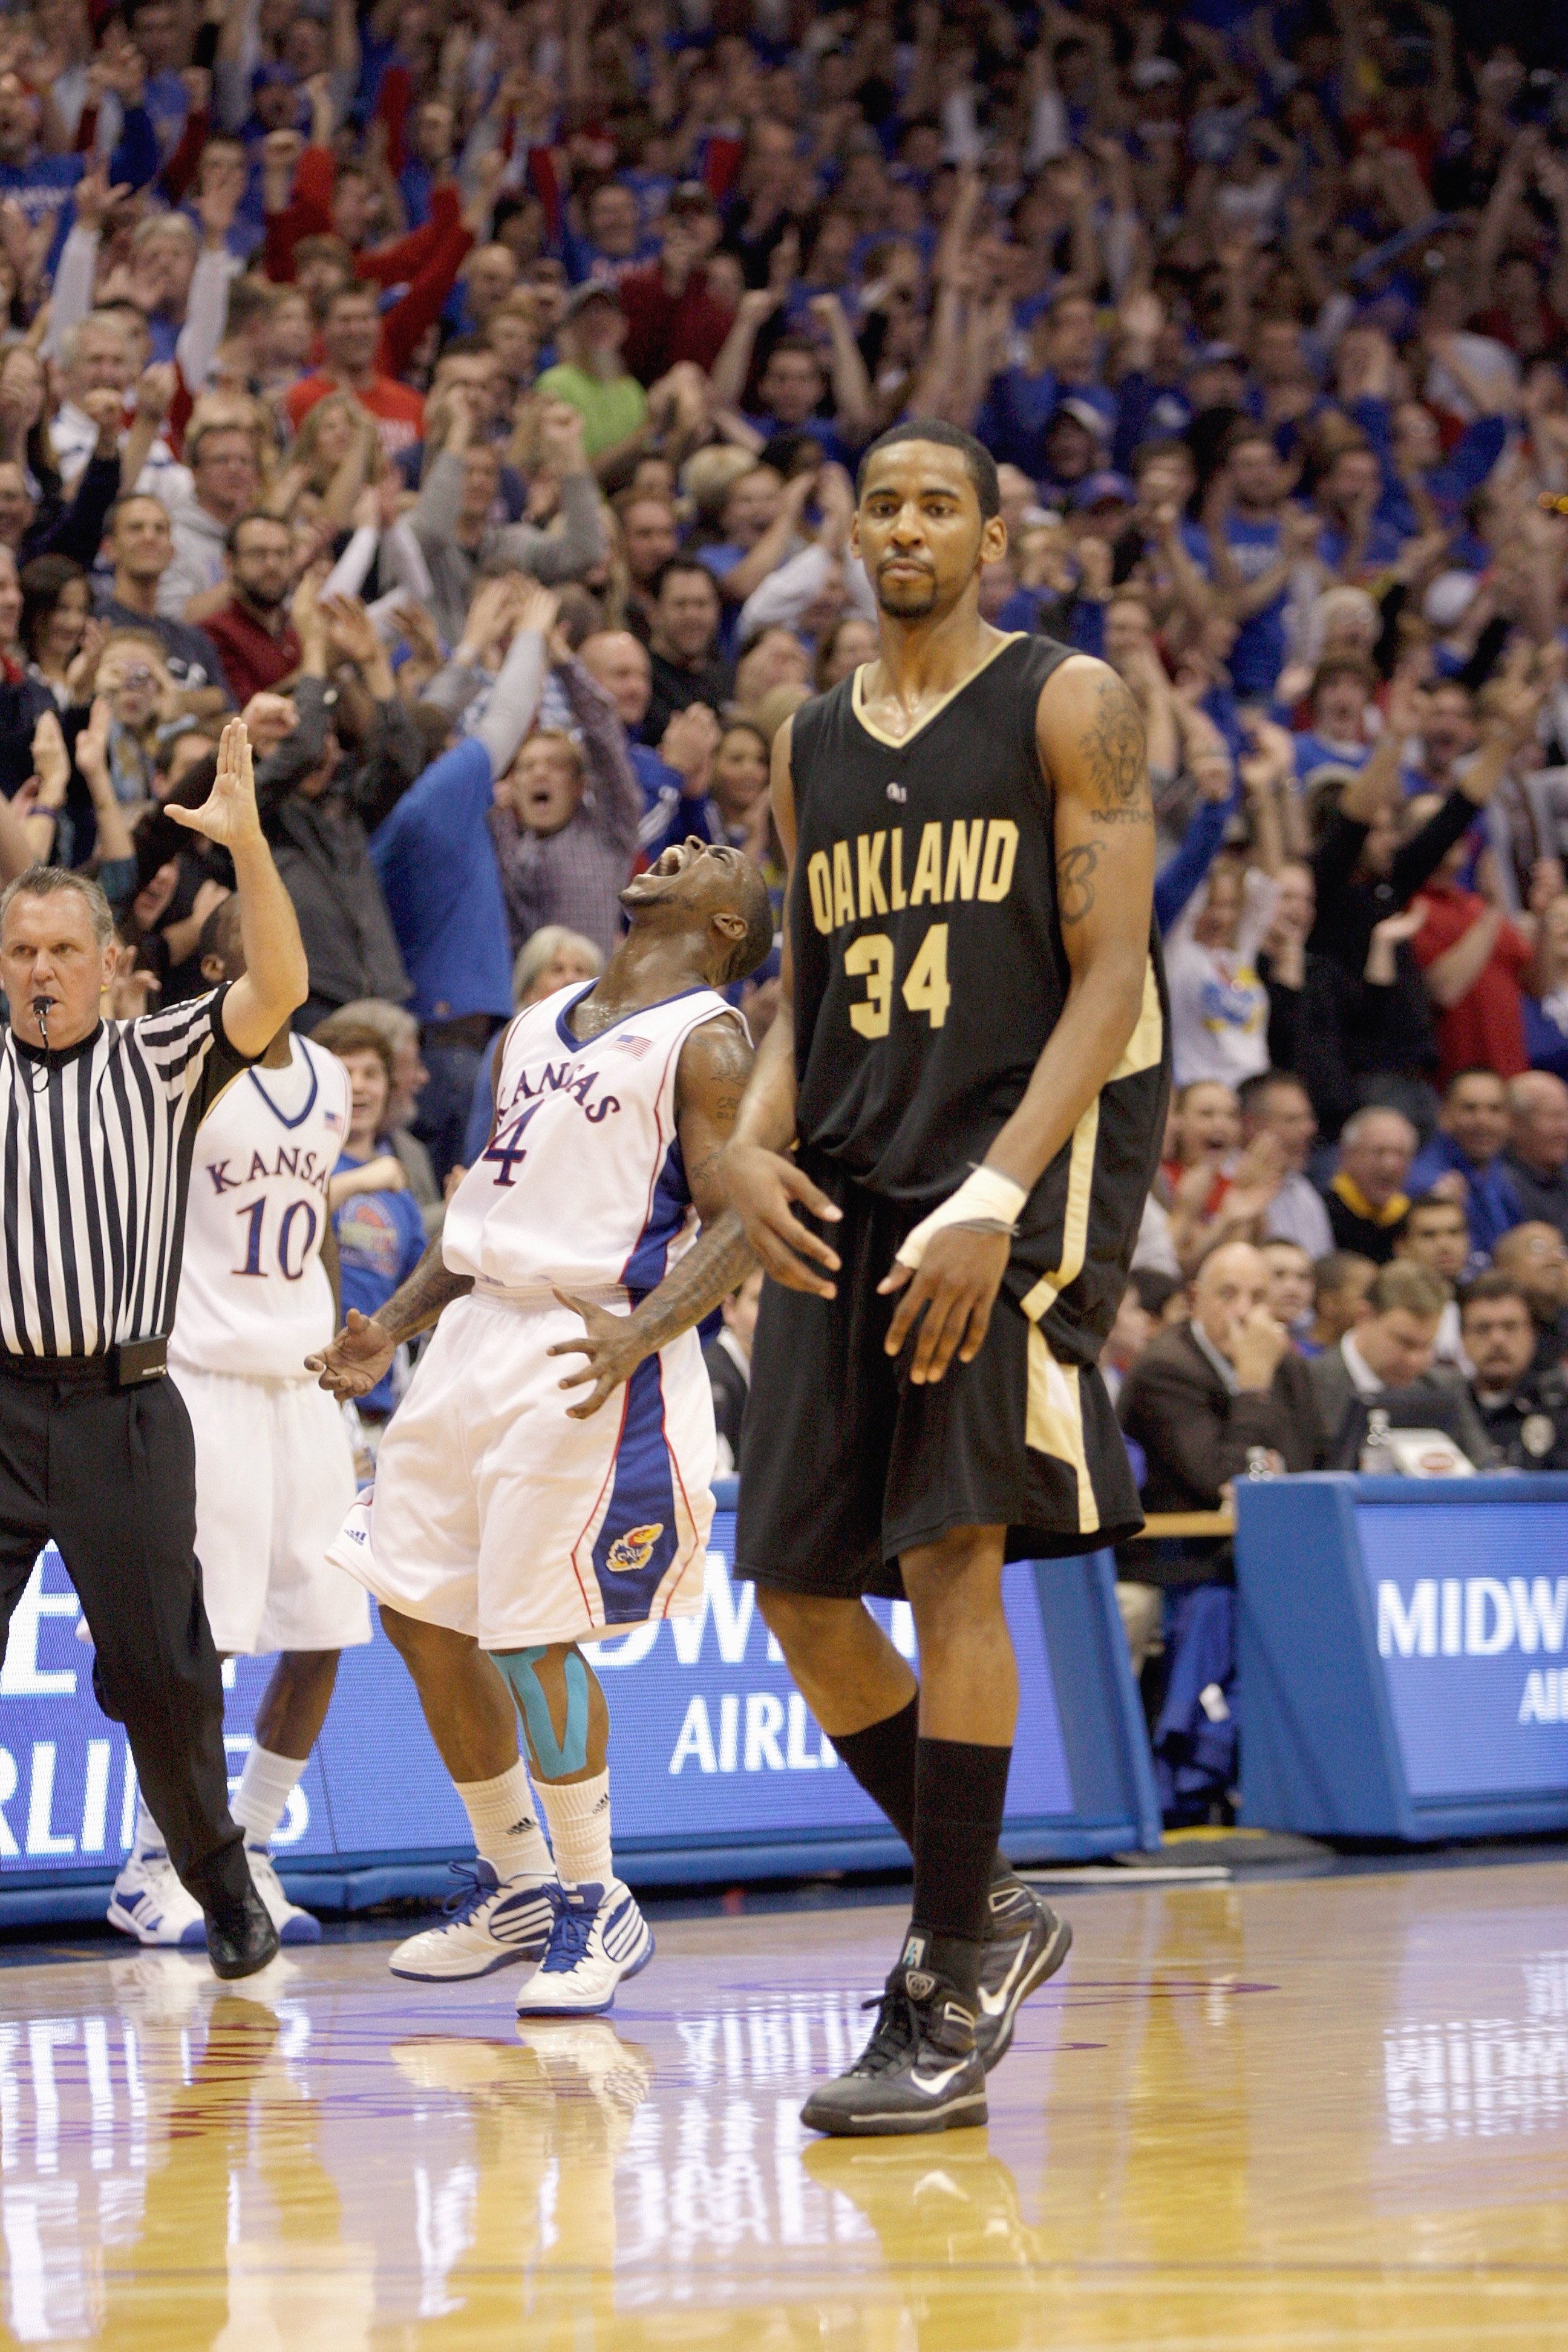 LAWRENCE, KS - NOVEMBER 25:  Keith Benson #34 of the Oakland Golden Grizzlies walks on the court as fans of the Kansas Jayhawks cheer on November 25, 2009 at Allen Fieldhouse in Lawrence, Kansas. (Photo by Jamie Squire/Getty Images)